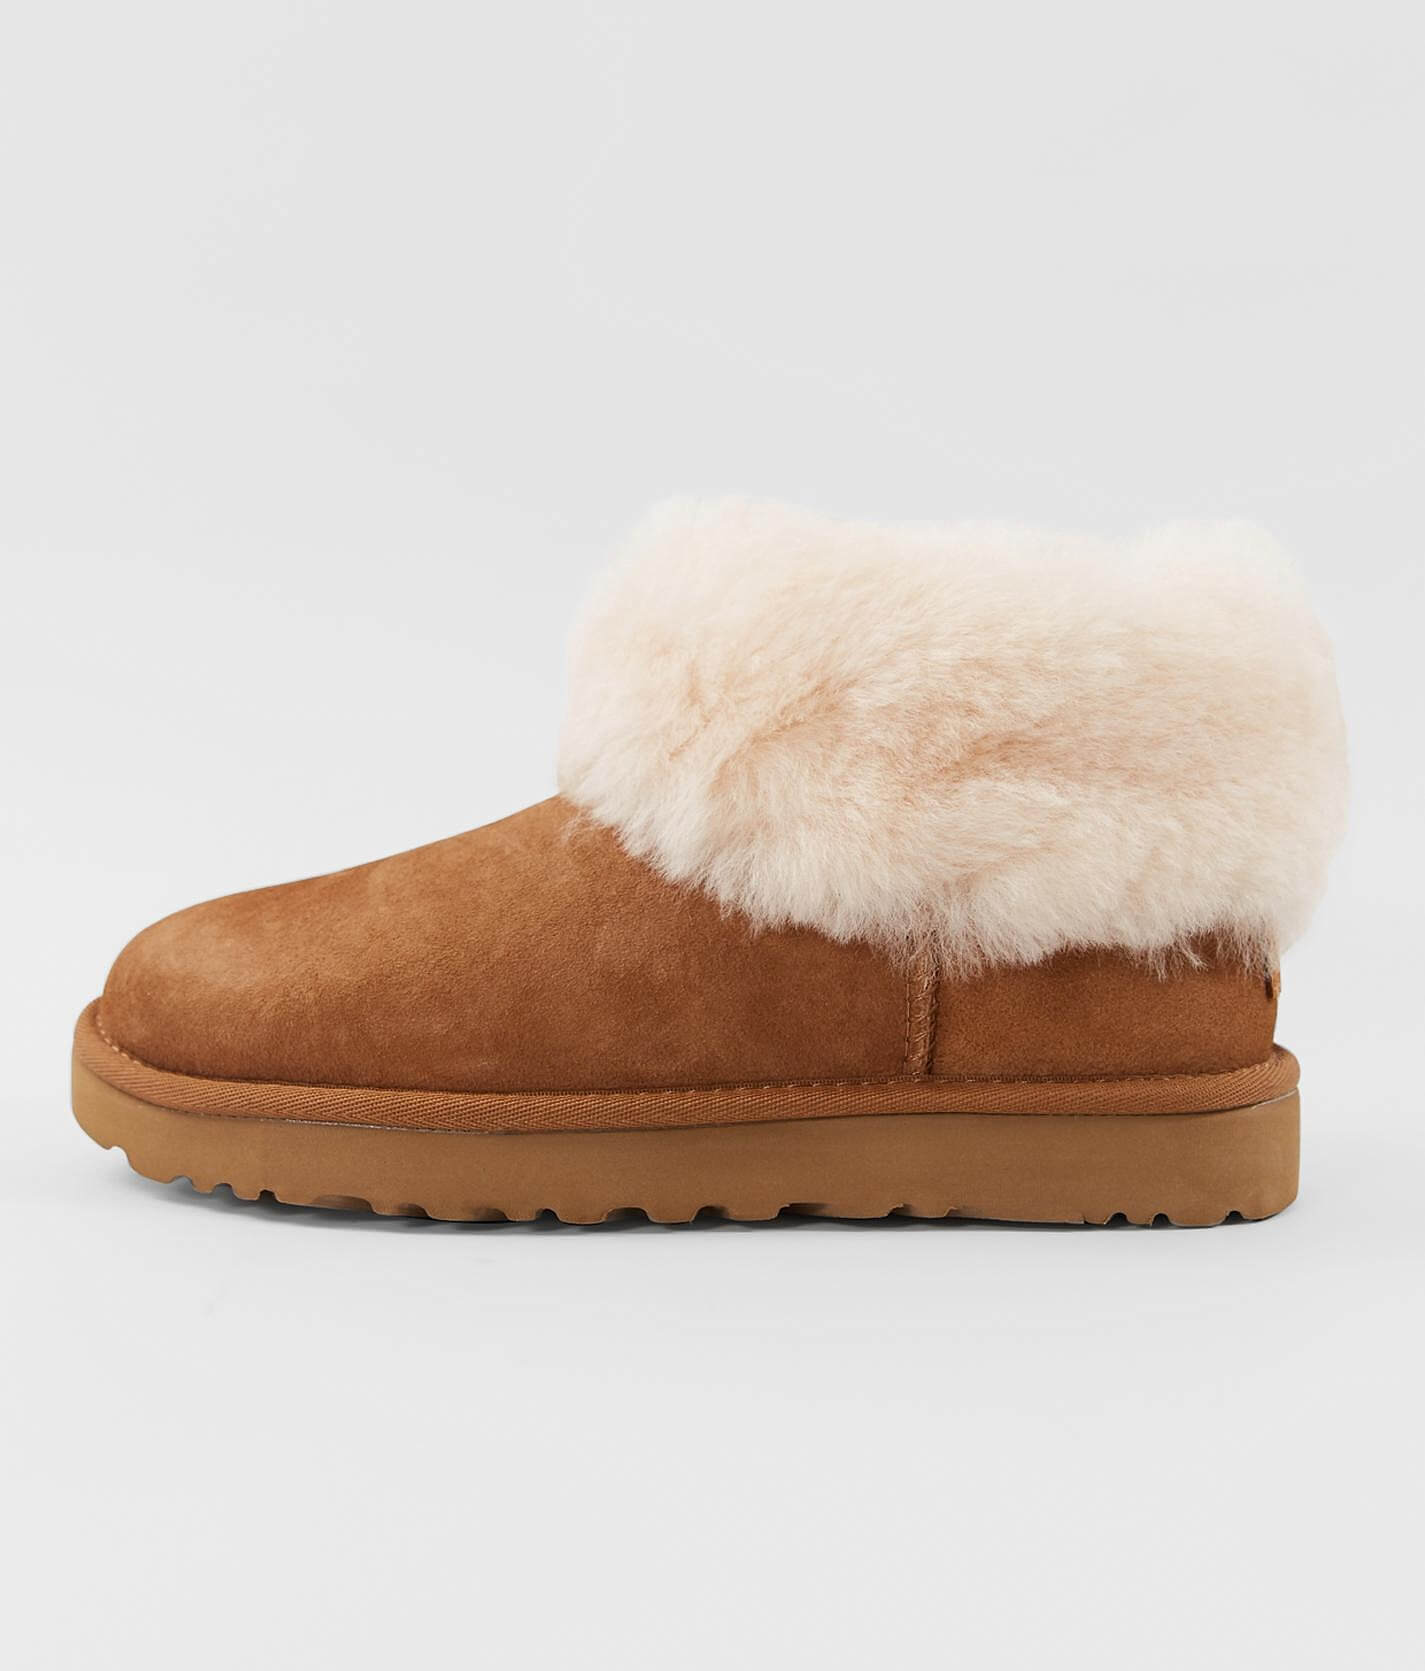 ugg leather and suede boots